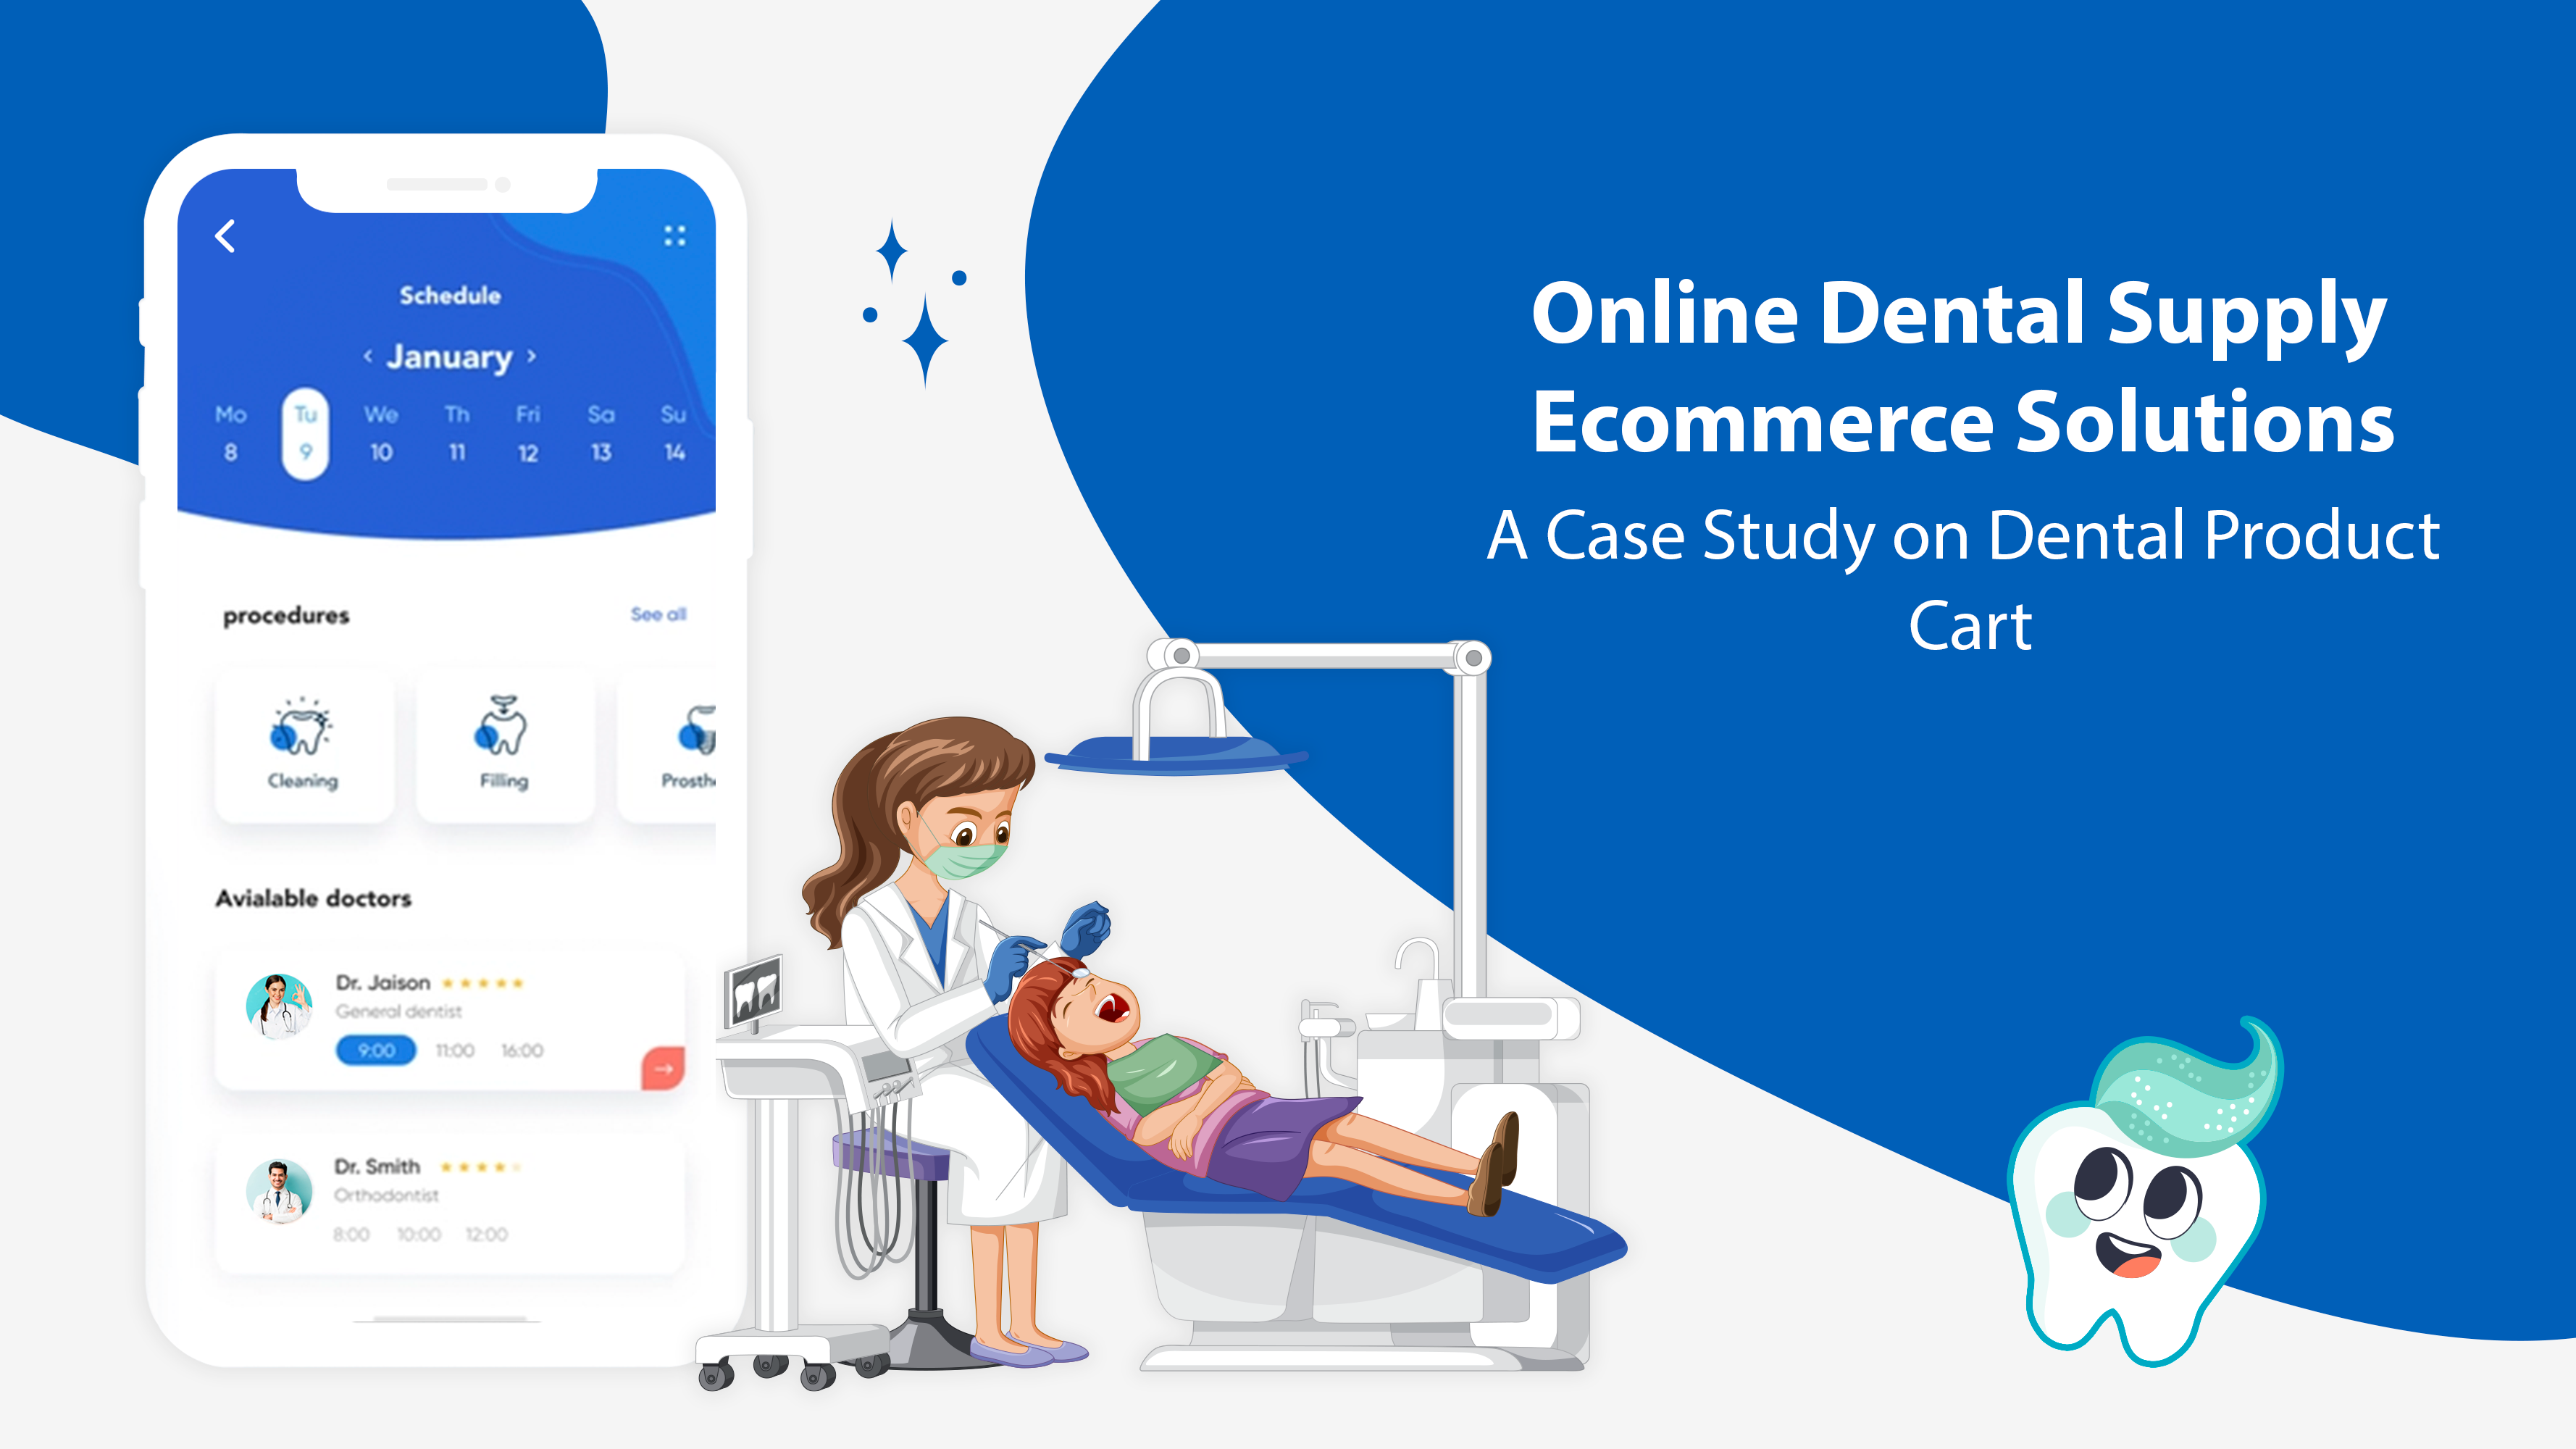 Online Dental Supply Ecommerce Solutions - A Case Study on Dental Product Cart